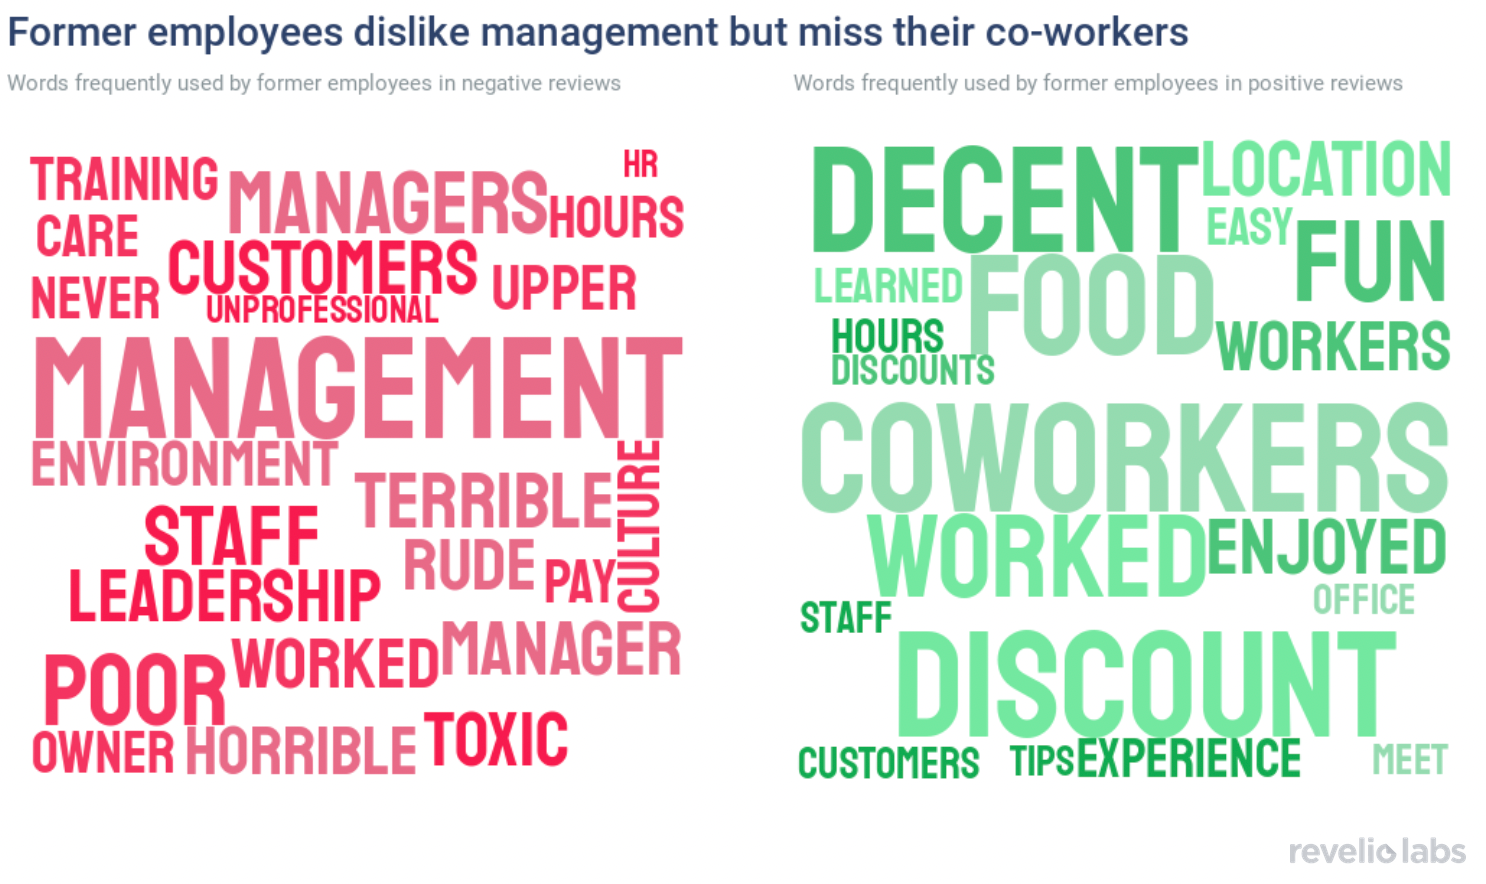 former employees dislike management but miss their co-workers